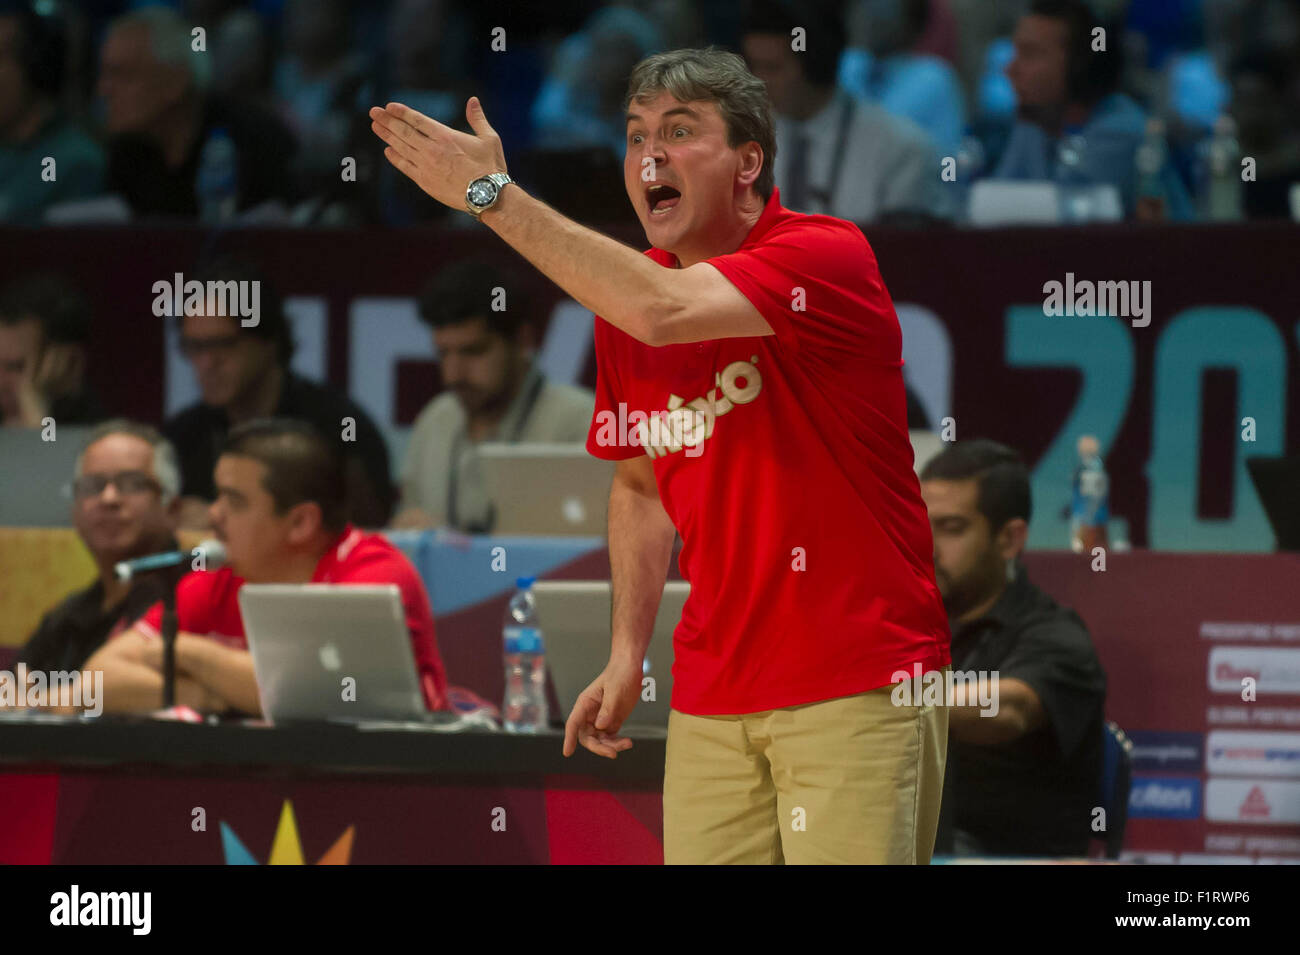 Mexico City, Mexico. 6th Sep, 2015. Mexico's head coach Sergio Valdeomillos reacts during the match against Puerto Rico at the FIBA Americas 2015, held in the Palacio de los Deportes, in Mexico City, capital of Mexico, on Sept. 6, 2015. Mexico won the match. Credit:  Oscar Ramirez/Xinhua/Alamy Live News Stock Photo